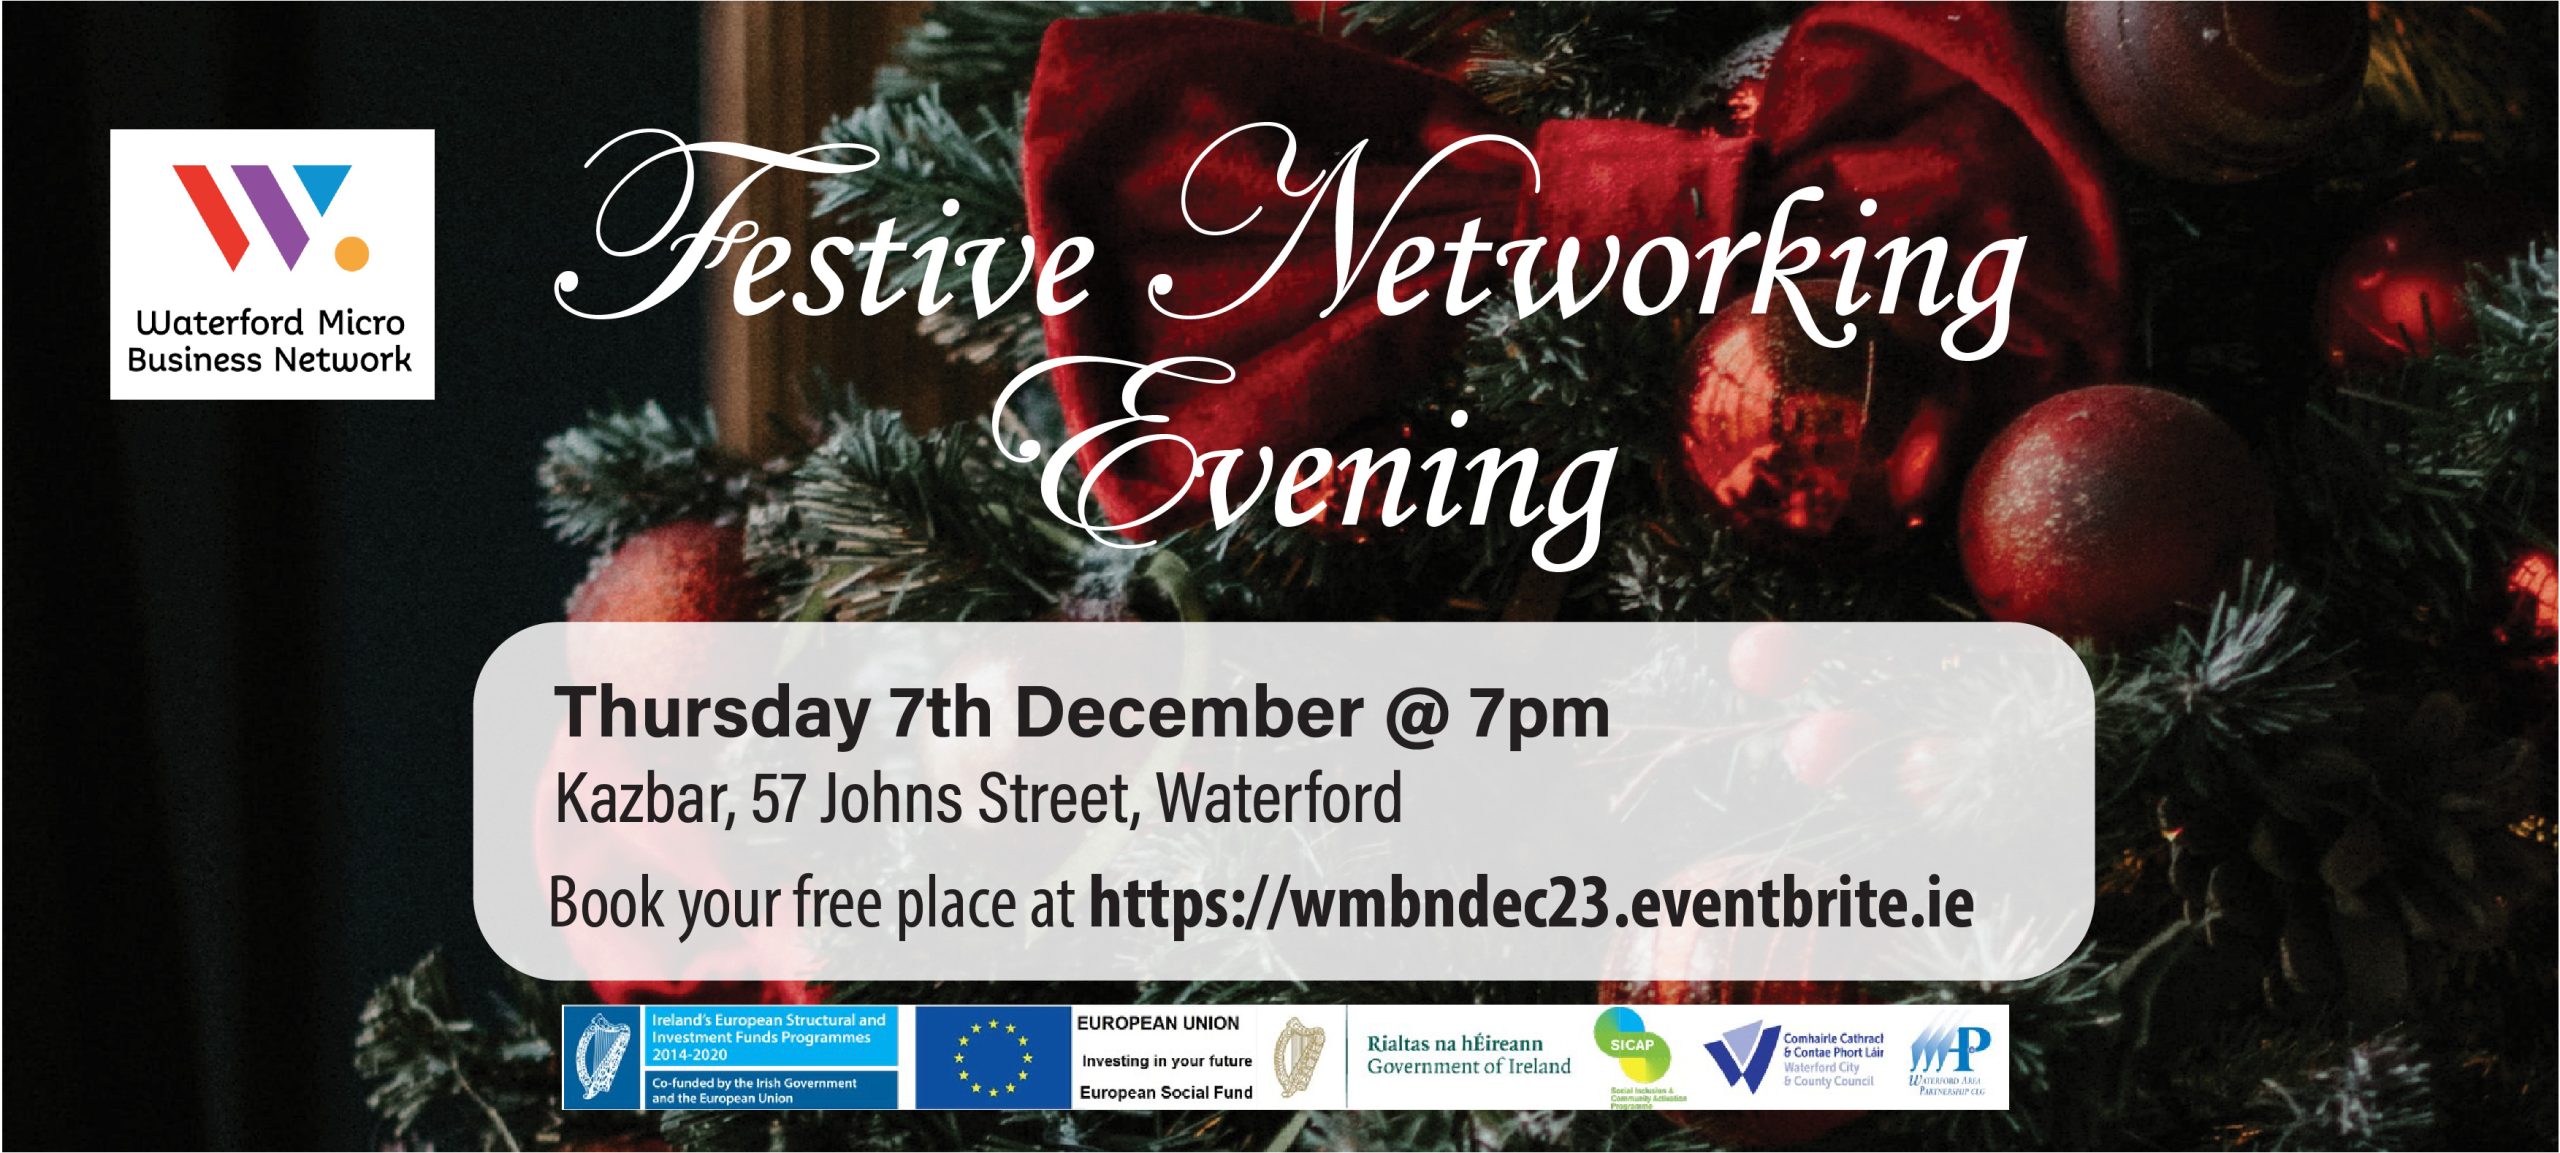 Join us for a bit of Festive Cheer on December 7th. Come and join in the festive fun and mingle with your fellow micro business owners. Tickets are free but registering is required in order to attend.